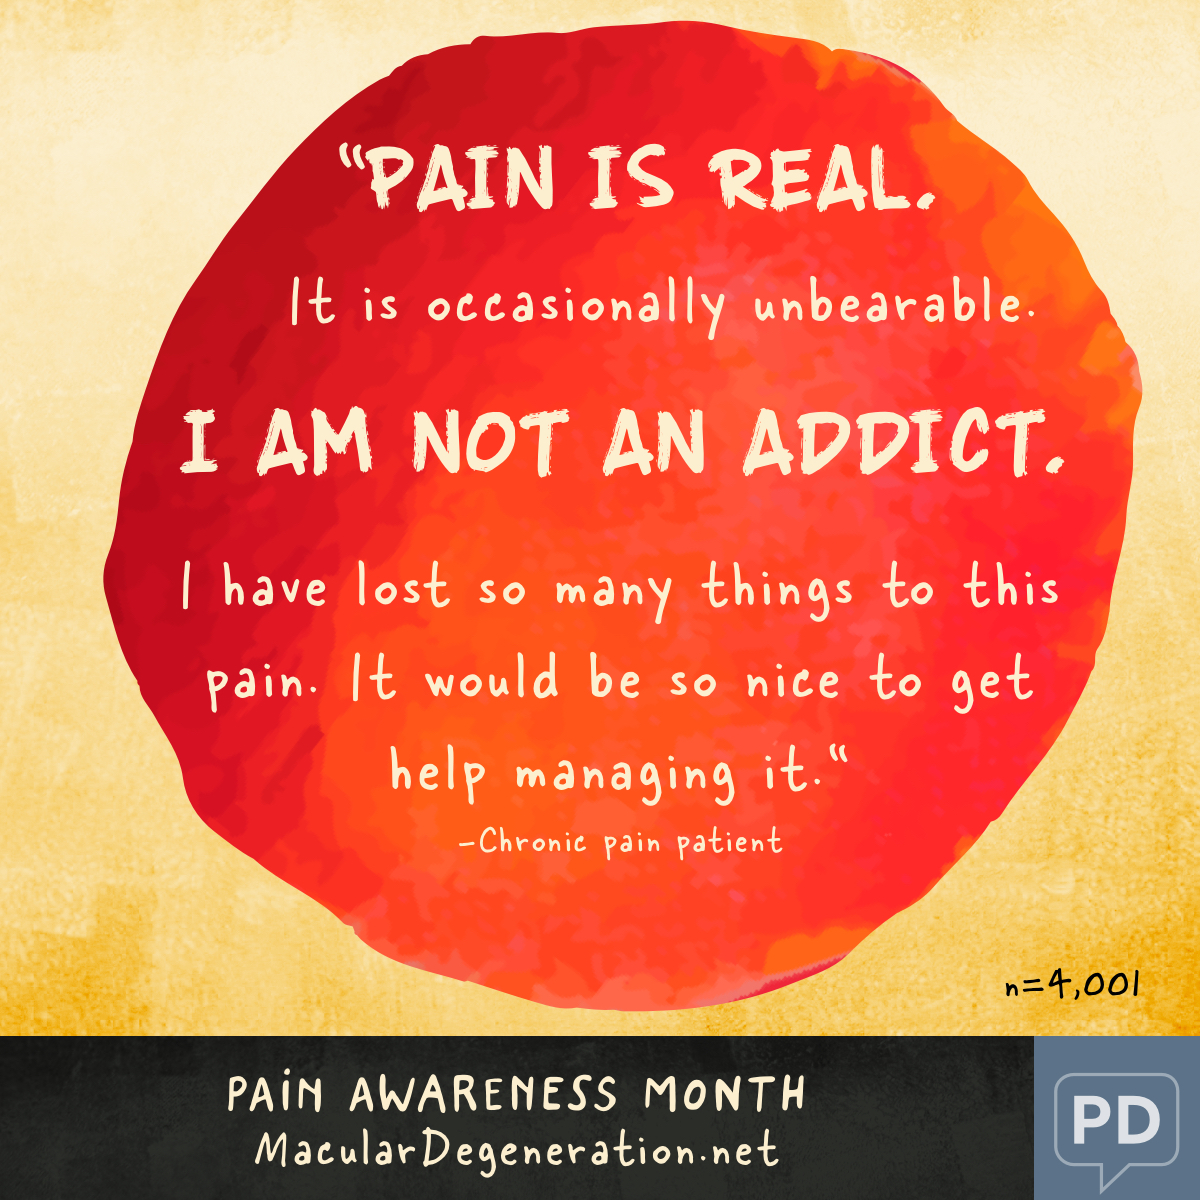 Quote describing pain as real, unbearable, and life changing. They are not an addict and just want help with the pain